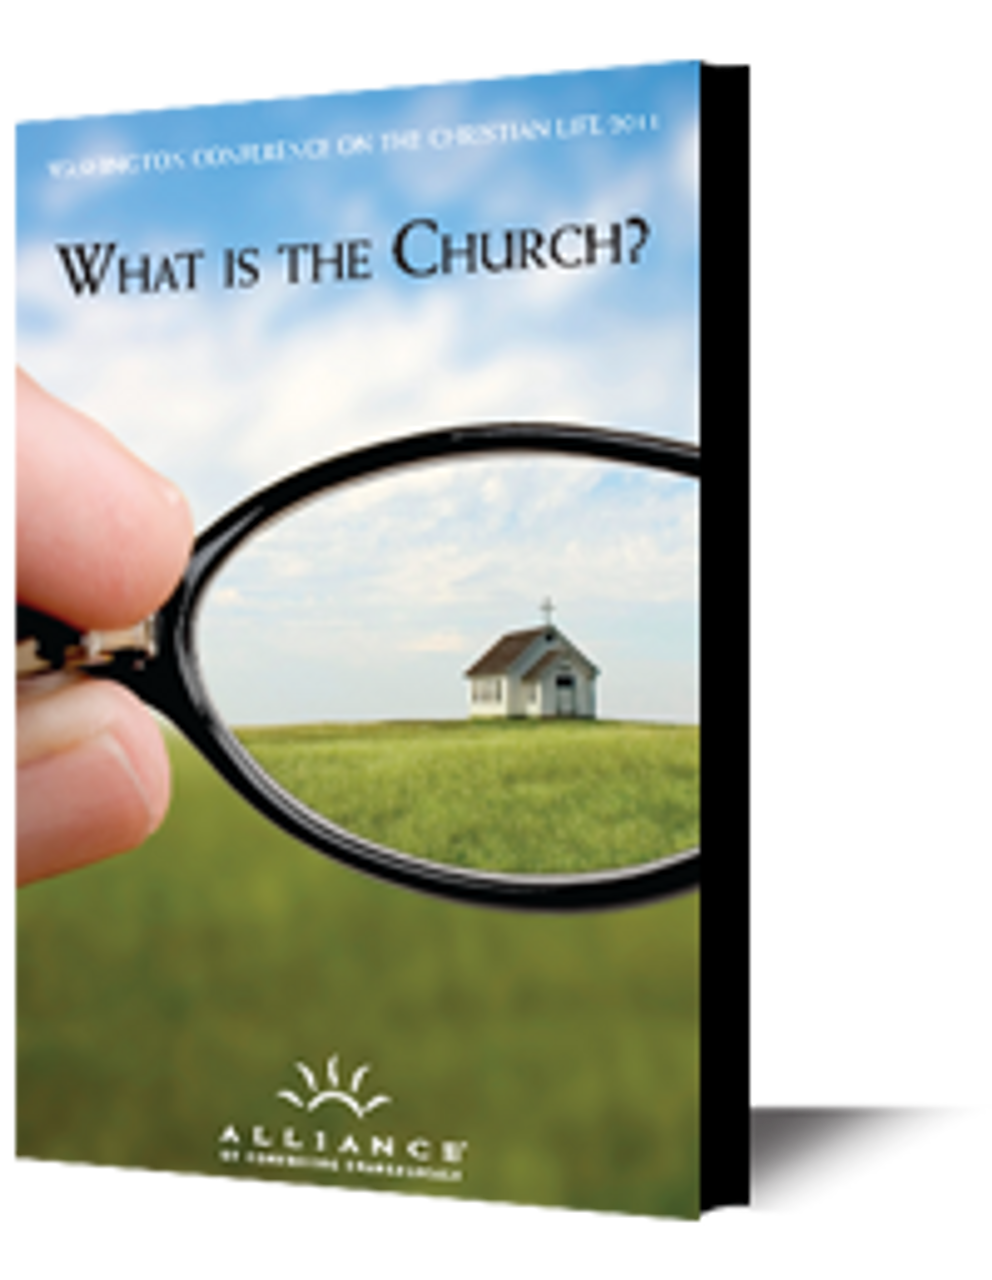 The Church and the Christian Life (CD)